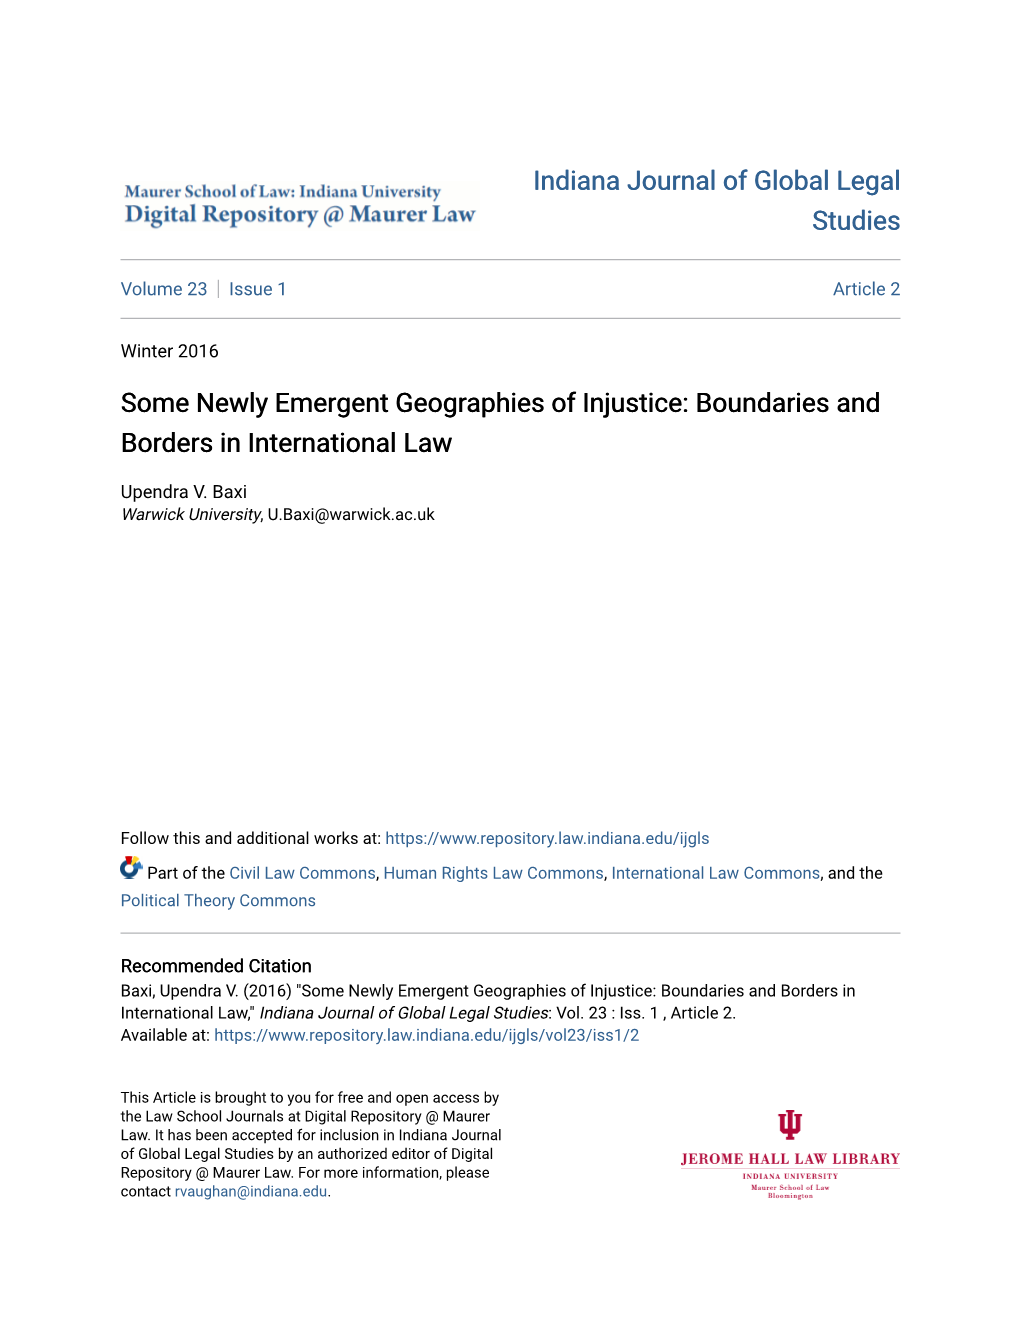 Some Newly Emergent Geographies of Injustice: Boundaries and Borders in International Law